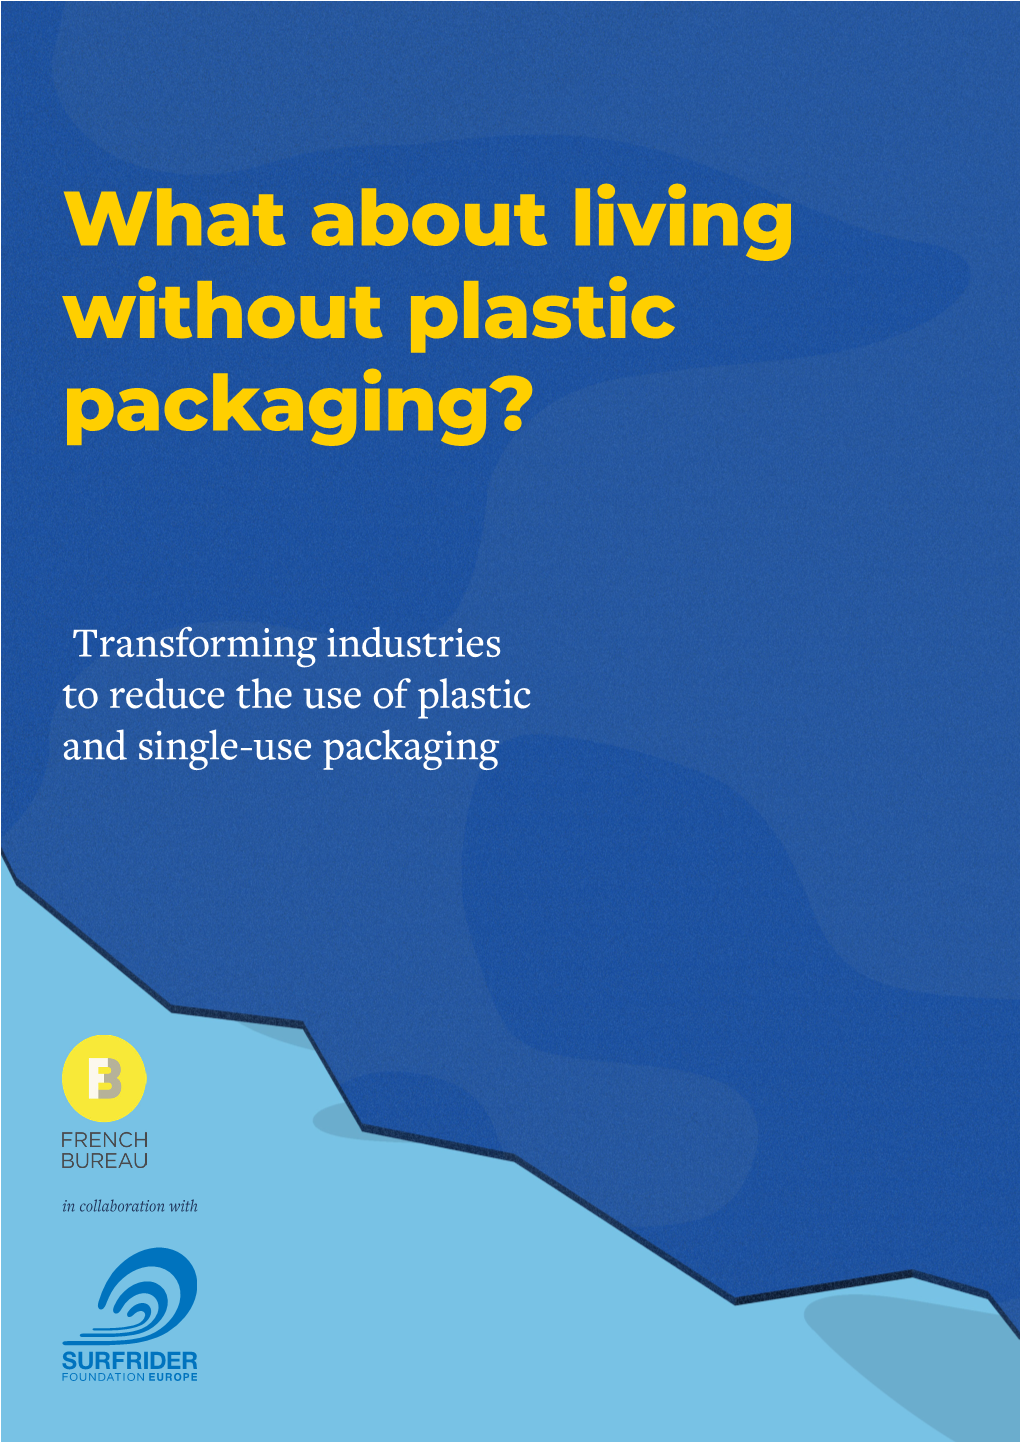 What About Living Without Plastic Packaging?